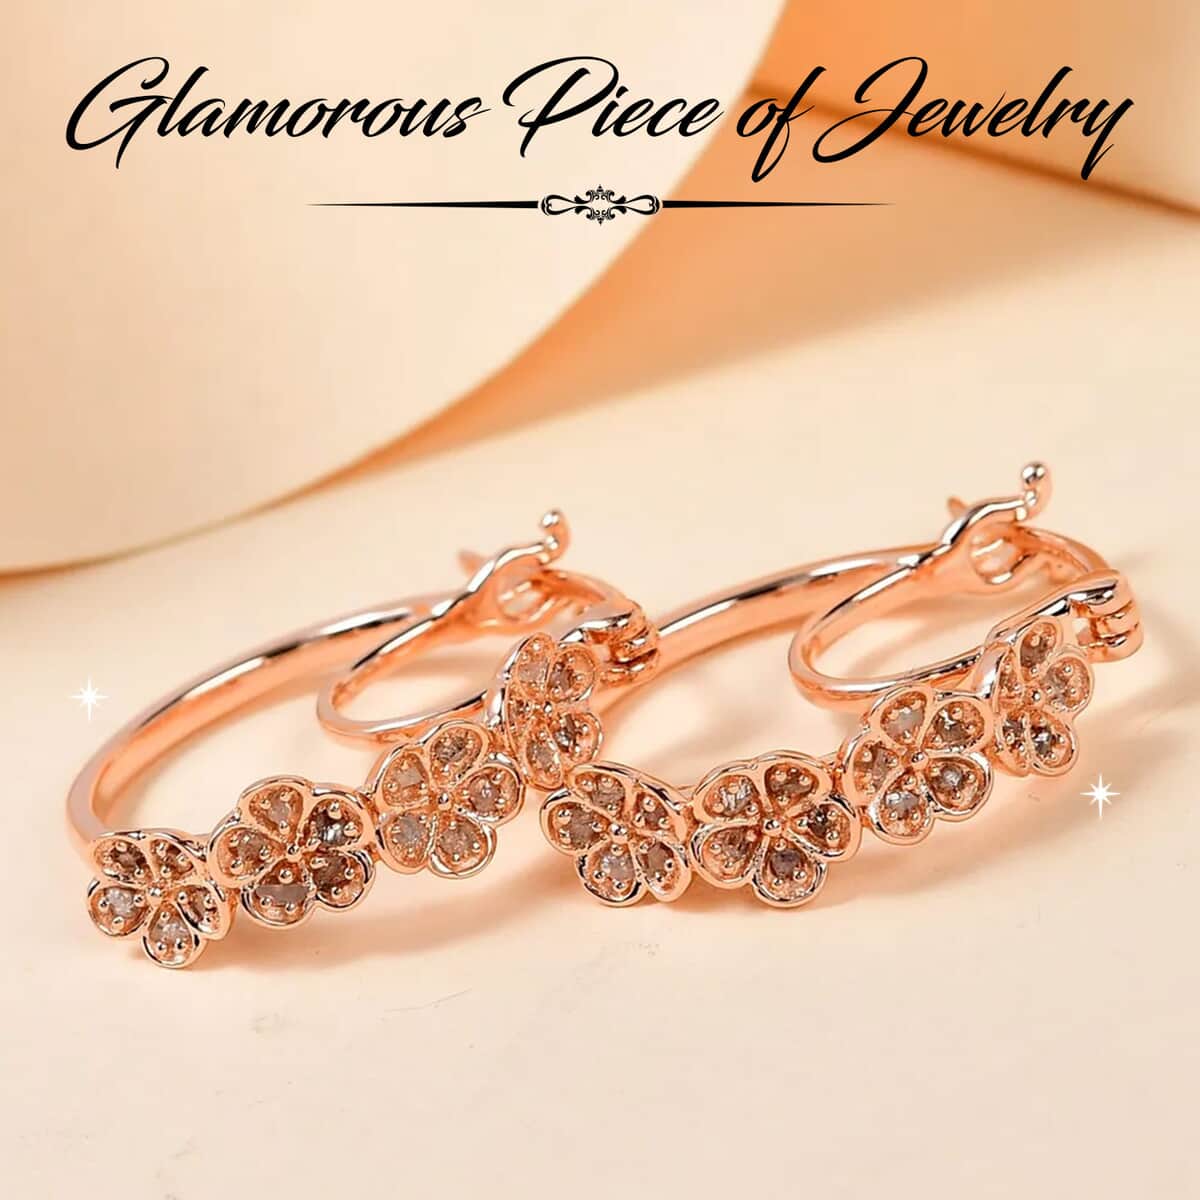 Uncut Natural Pink Diamond Floral Hoop Earrings, Vermeil Rose Gold Over Sterling Silver Earrings, Pink Diamond Jewelry For Her, Diamond Gifts 0.33 ctw image number 1